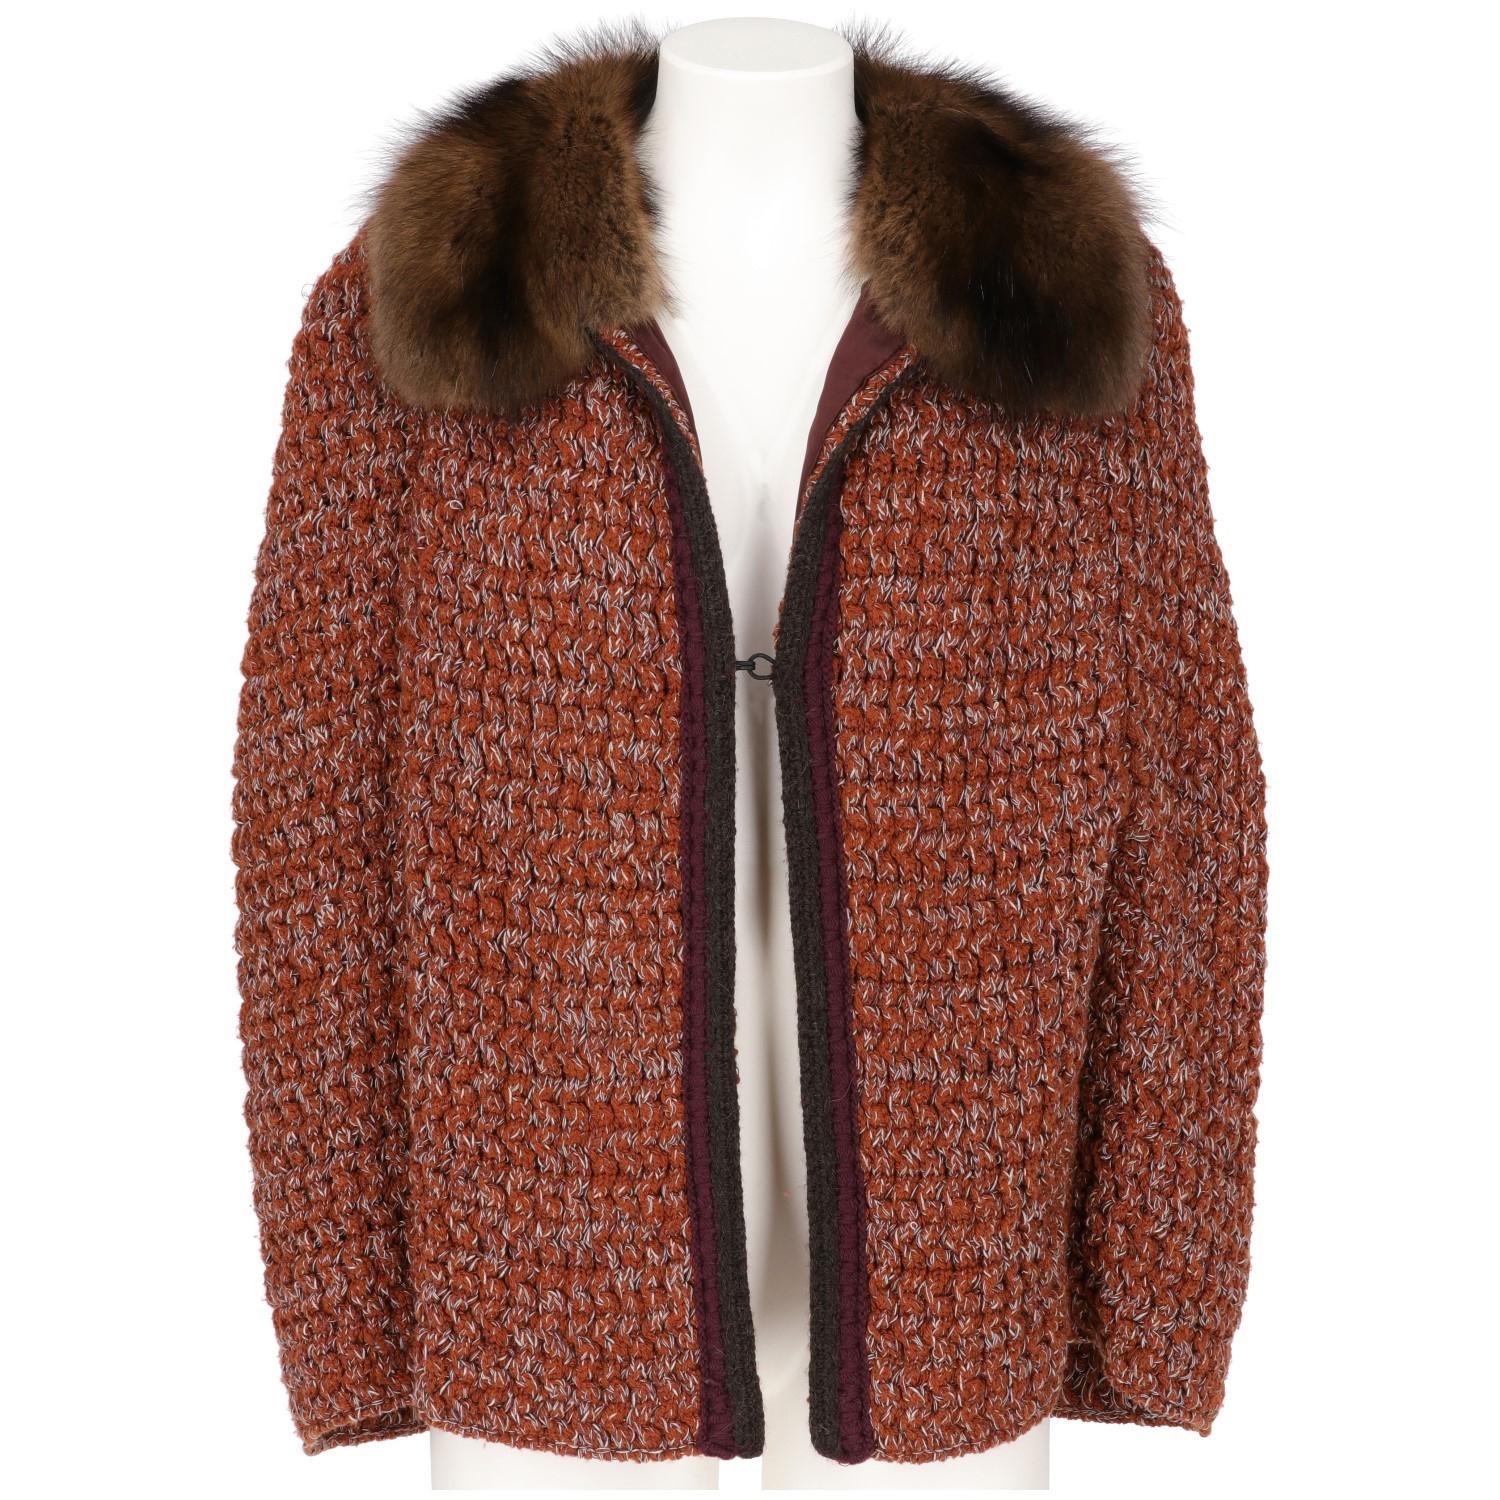 Prada short bell cape sweater, made with rust orange wool knitting with white threads, with wide classic collar in soft genuine brown marten fur, hook and eye fastening with grey and purple knitted edges, armholes on front and purple silk